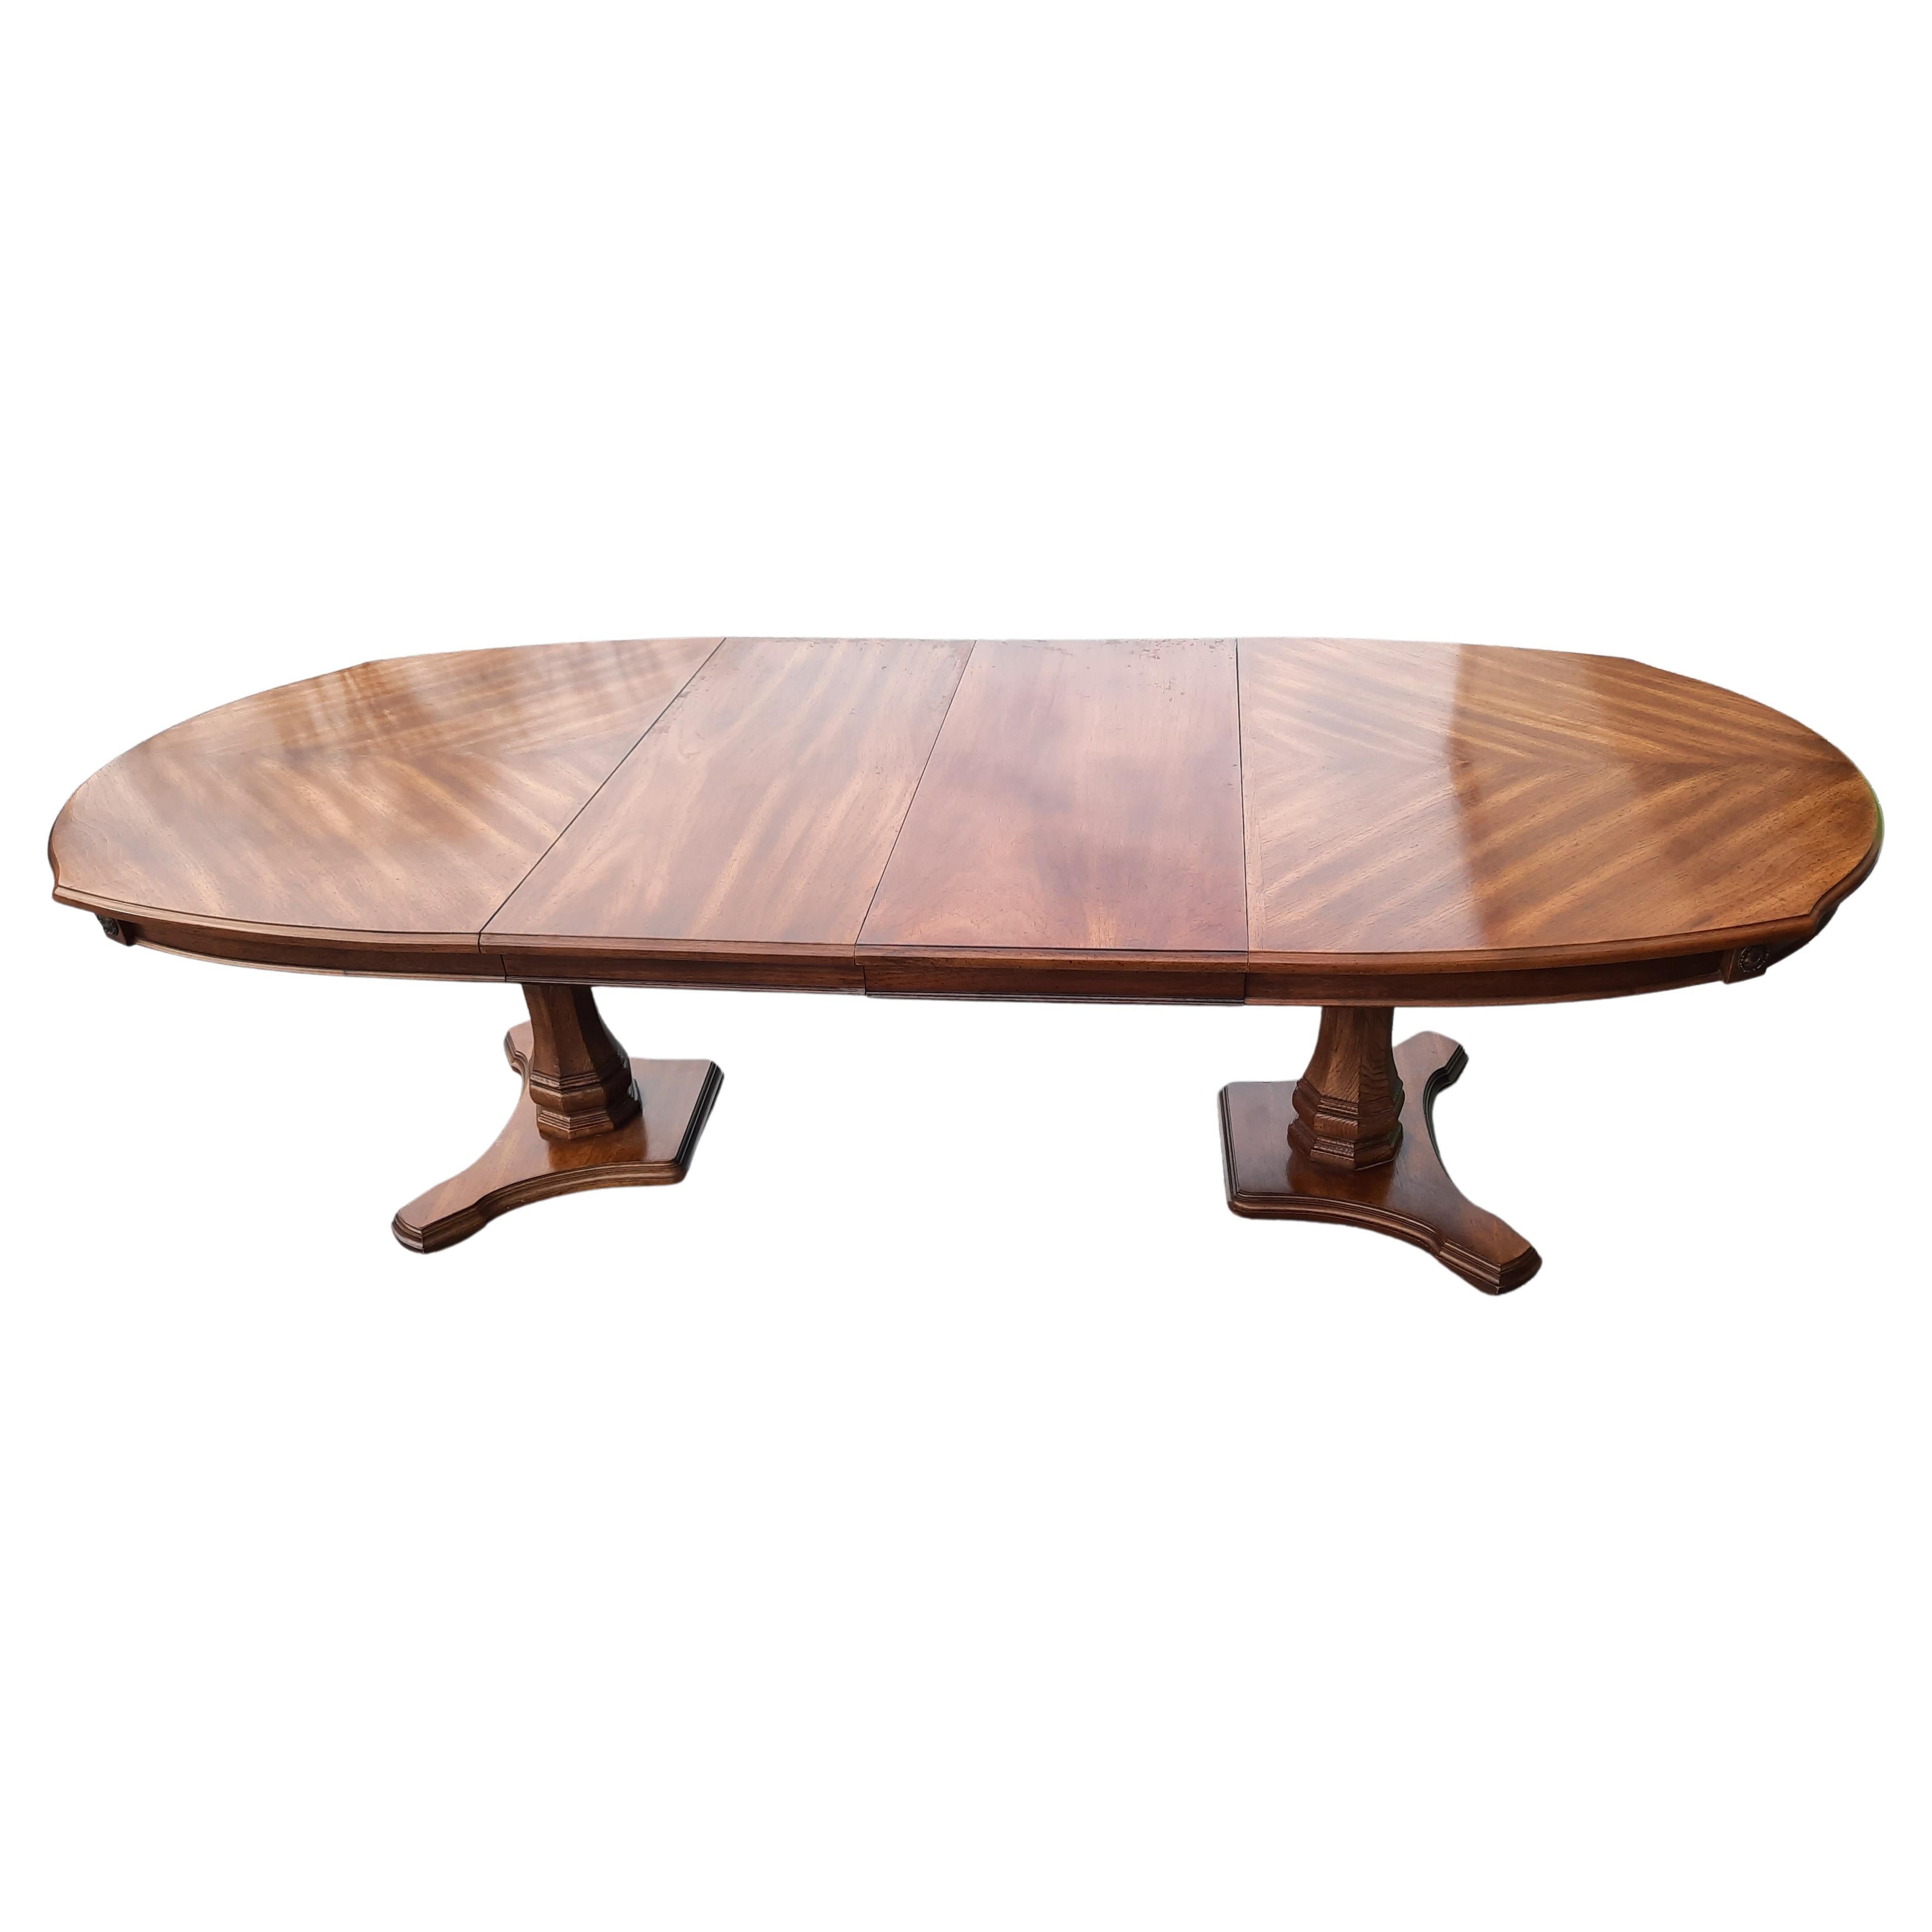 thomasville double pedestal dining table